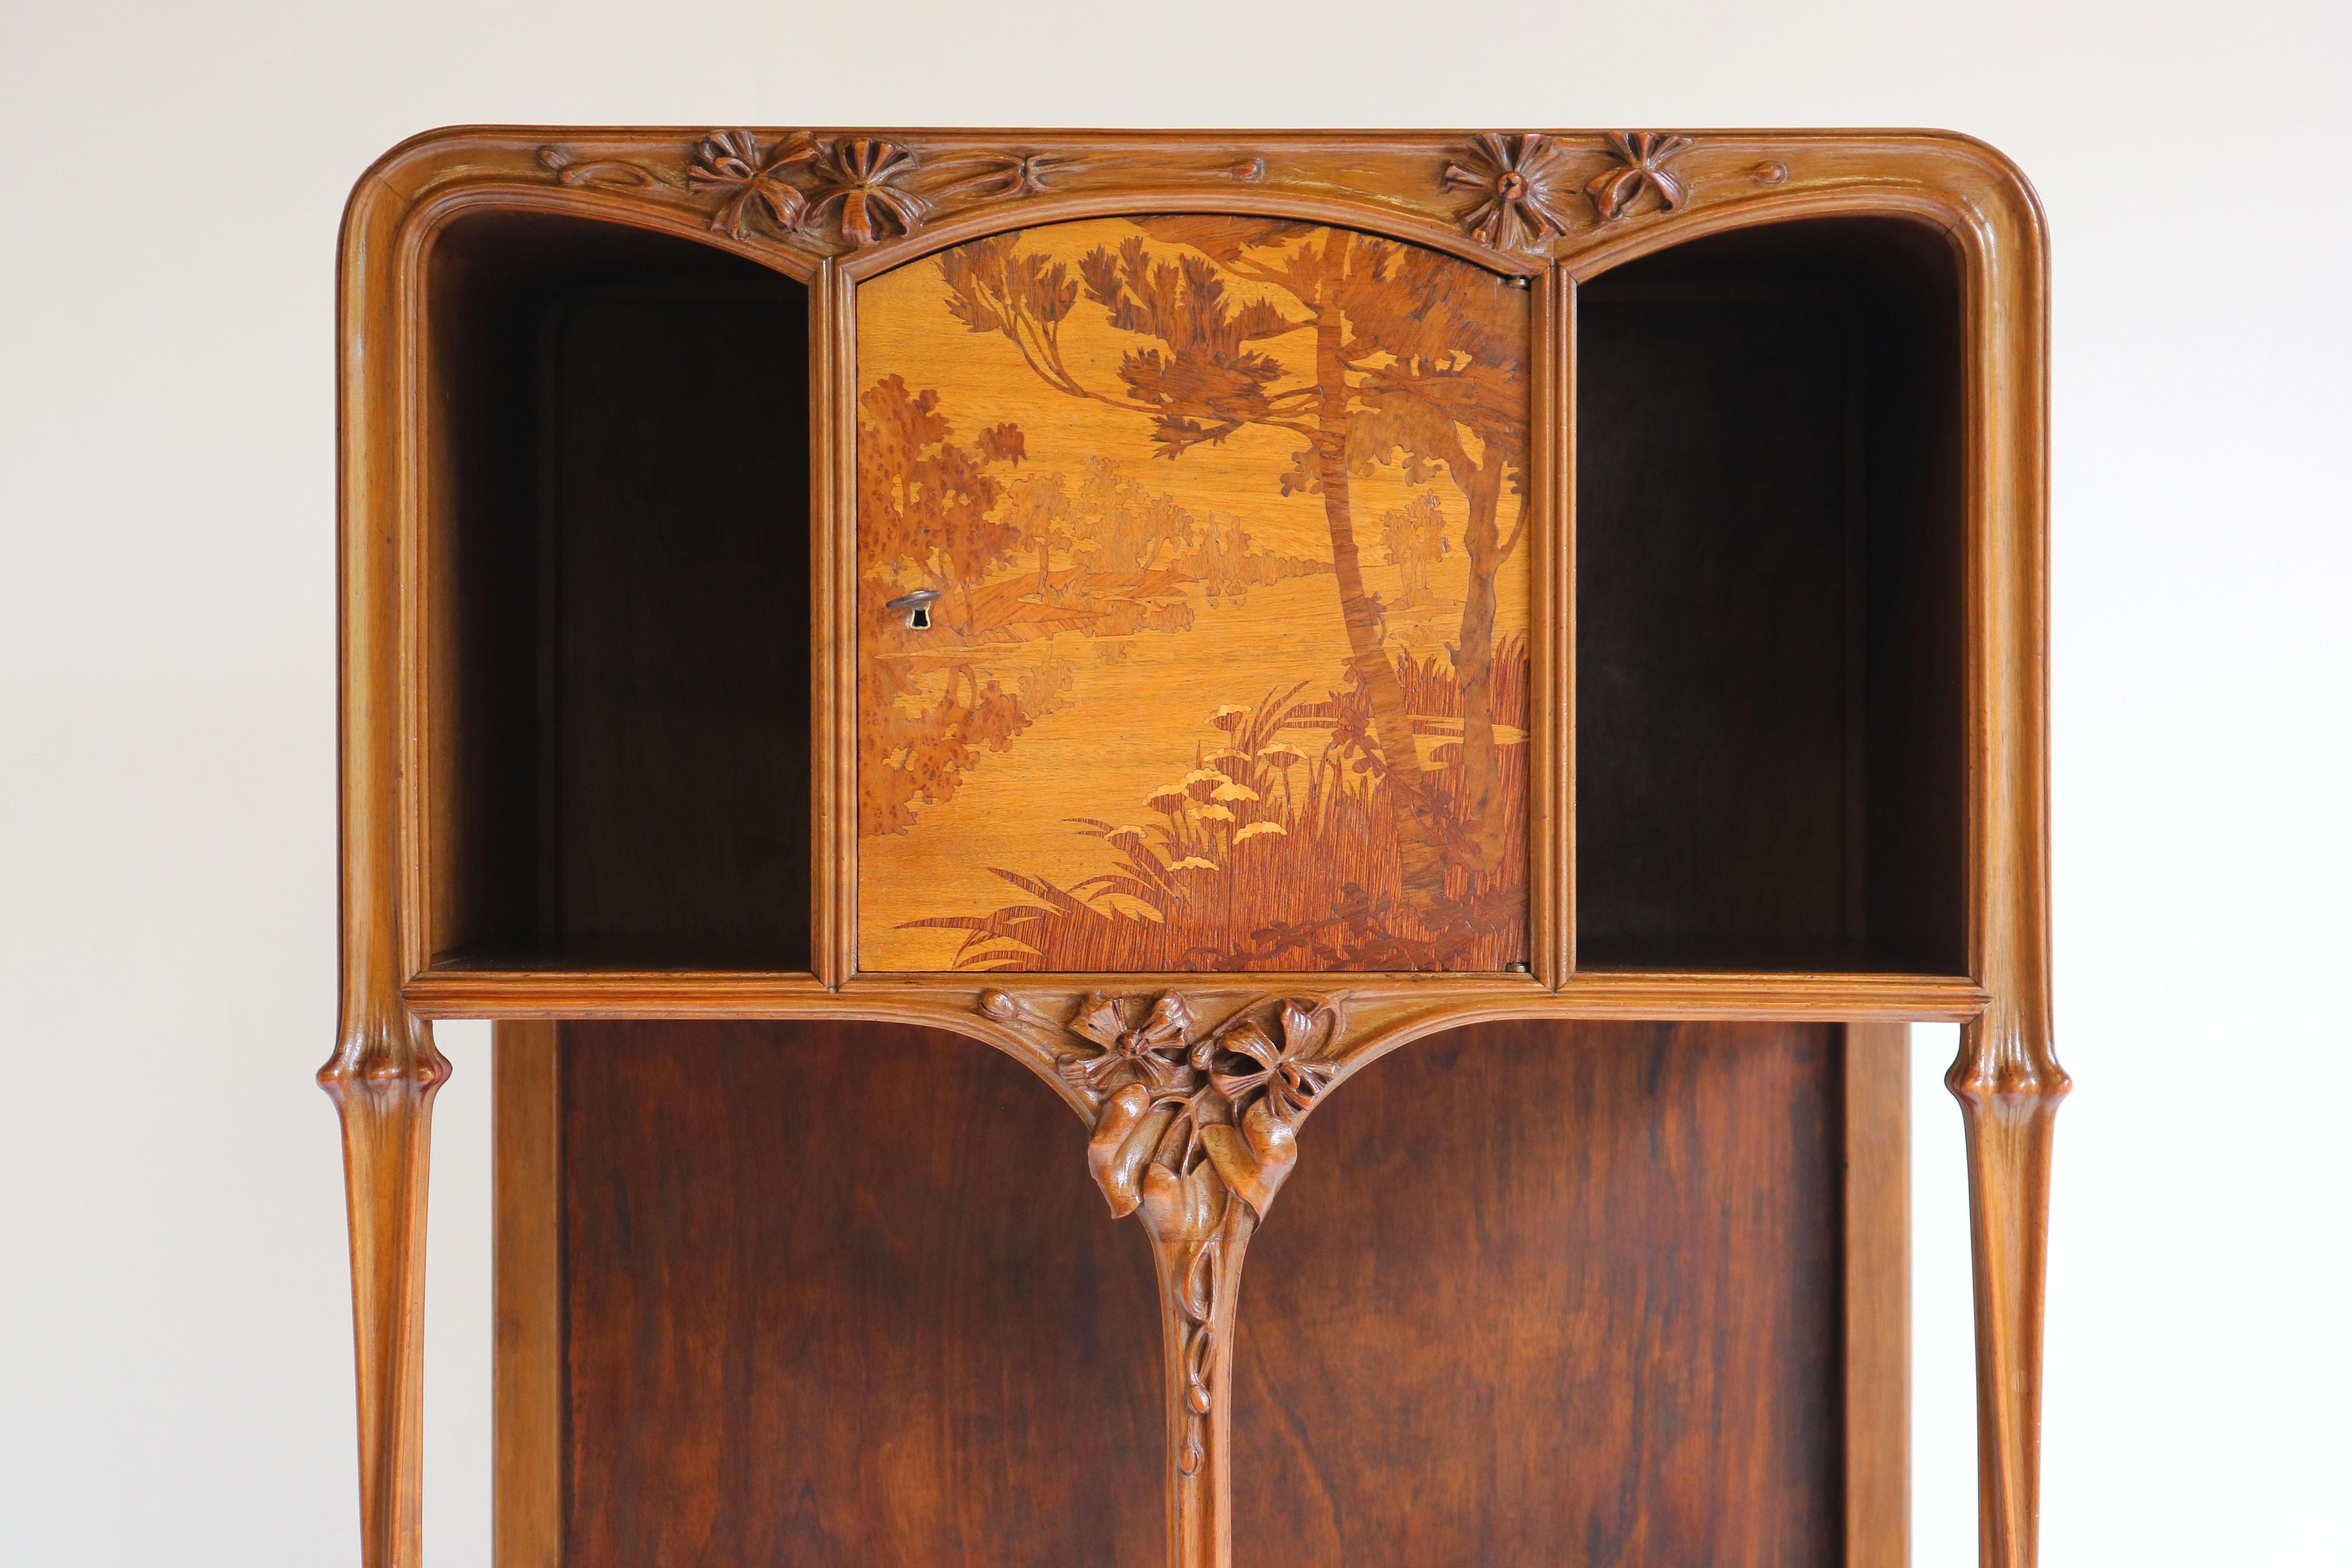 Exquisite & breathtaking! This French antique Art Nouveau cabinet / etagere by Louis Majorelle 1900 Nancy France. 
The upper door inlaid in various woods with a landscape, on carved supports with larger cupboard below, the door inlaid with irises,